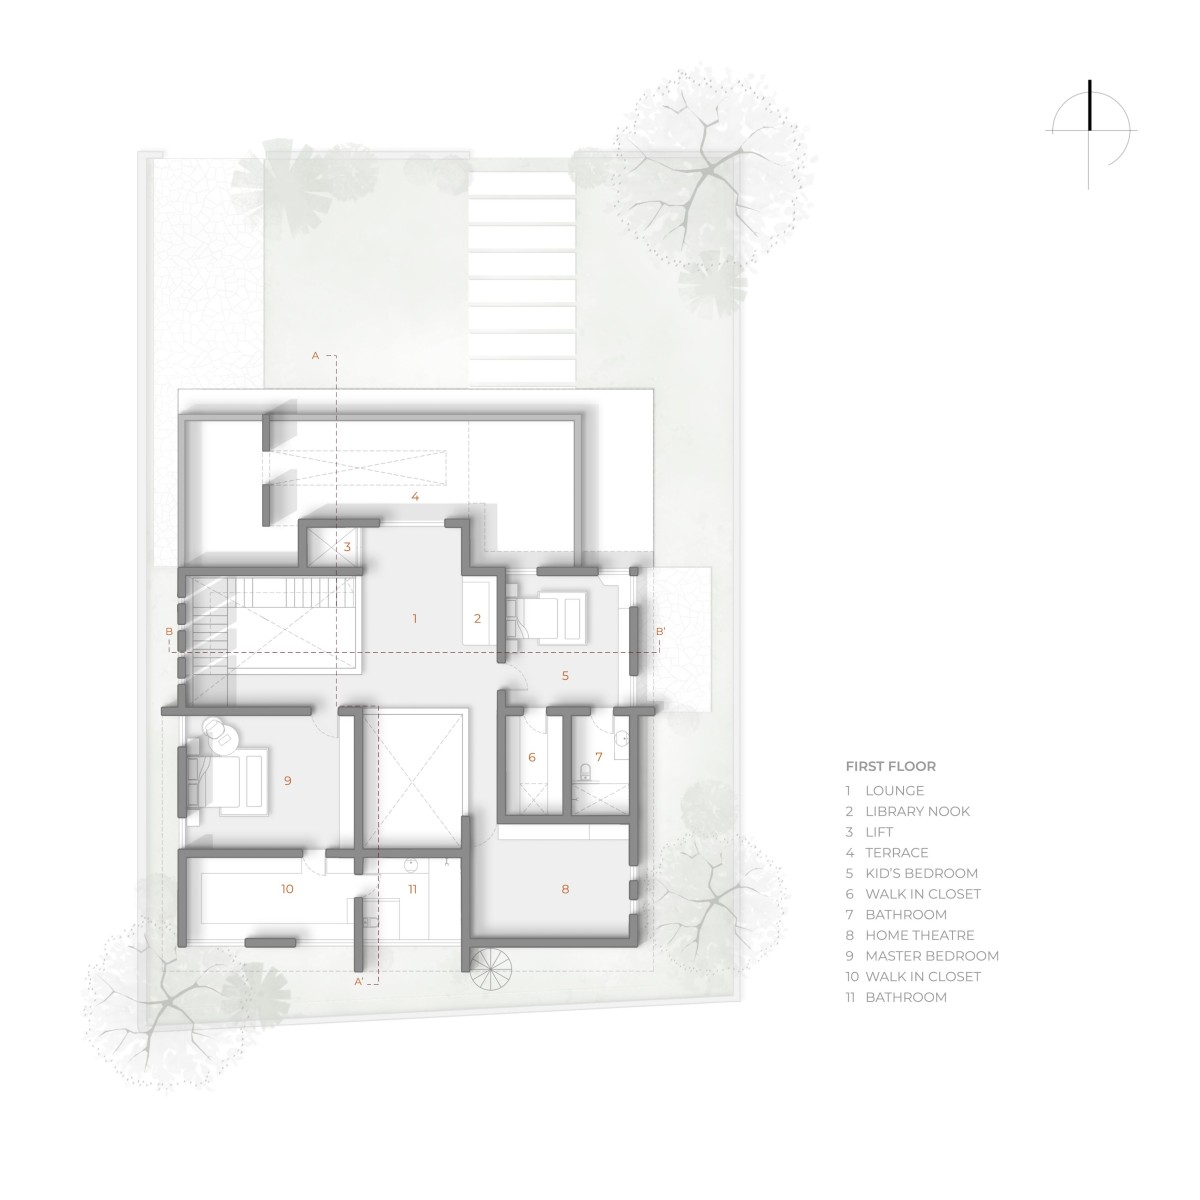 First Floor Plan of The House of Frames by KalaaZodh Architecture